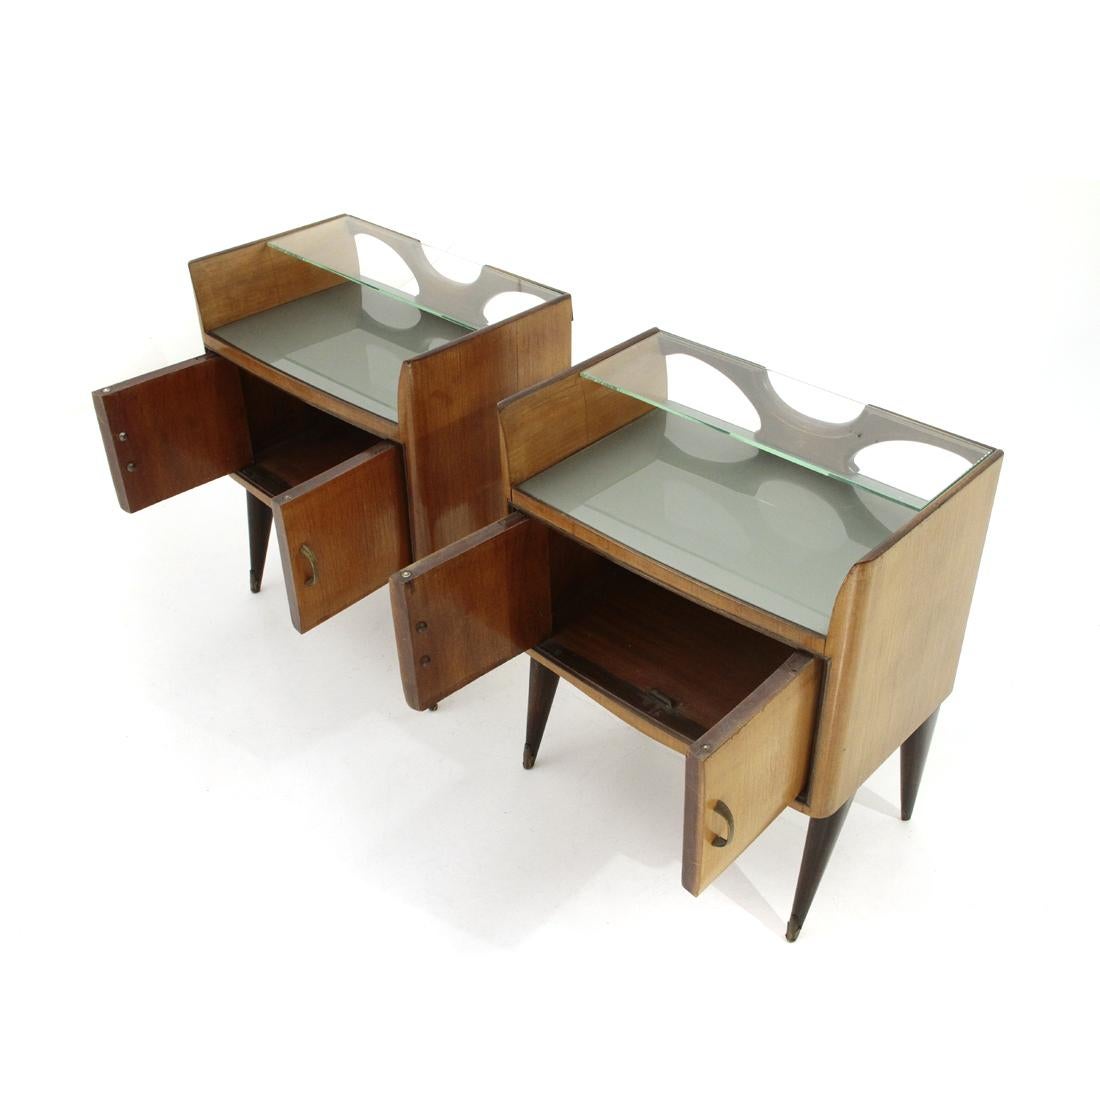 Wood Pair of Bedside Tables with Glass Shelf, 1950s